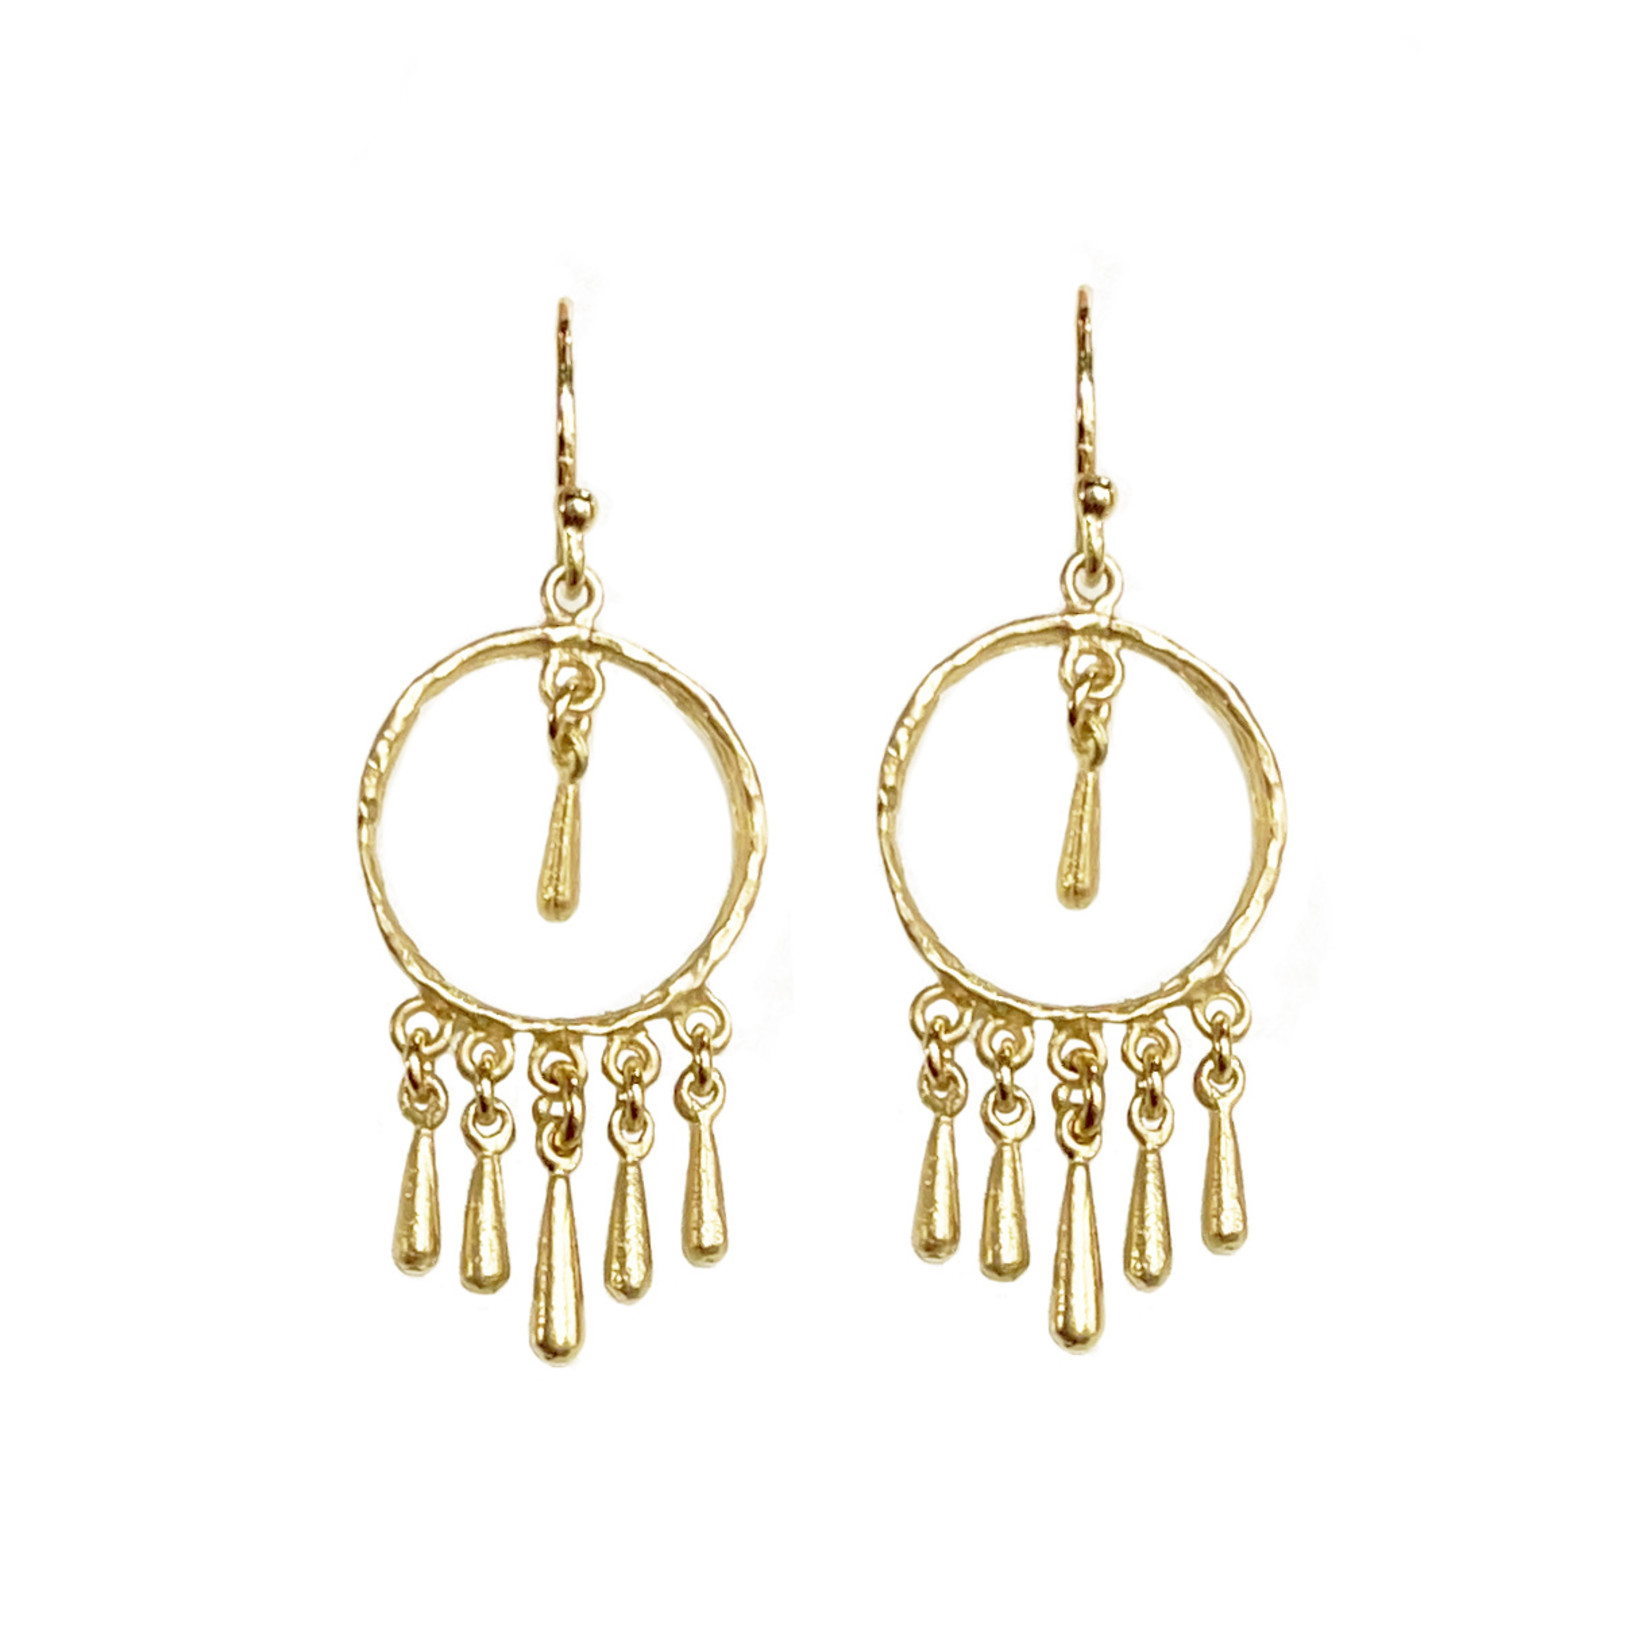 Victoria Cunningham Small Hoops with Fringe -14k